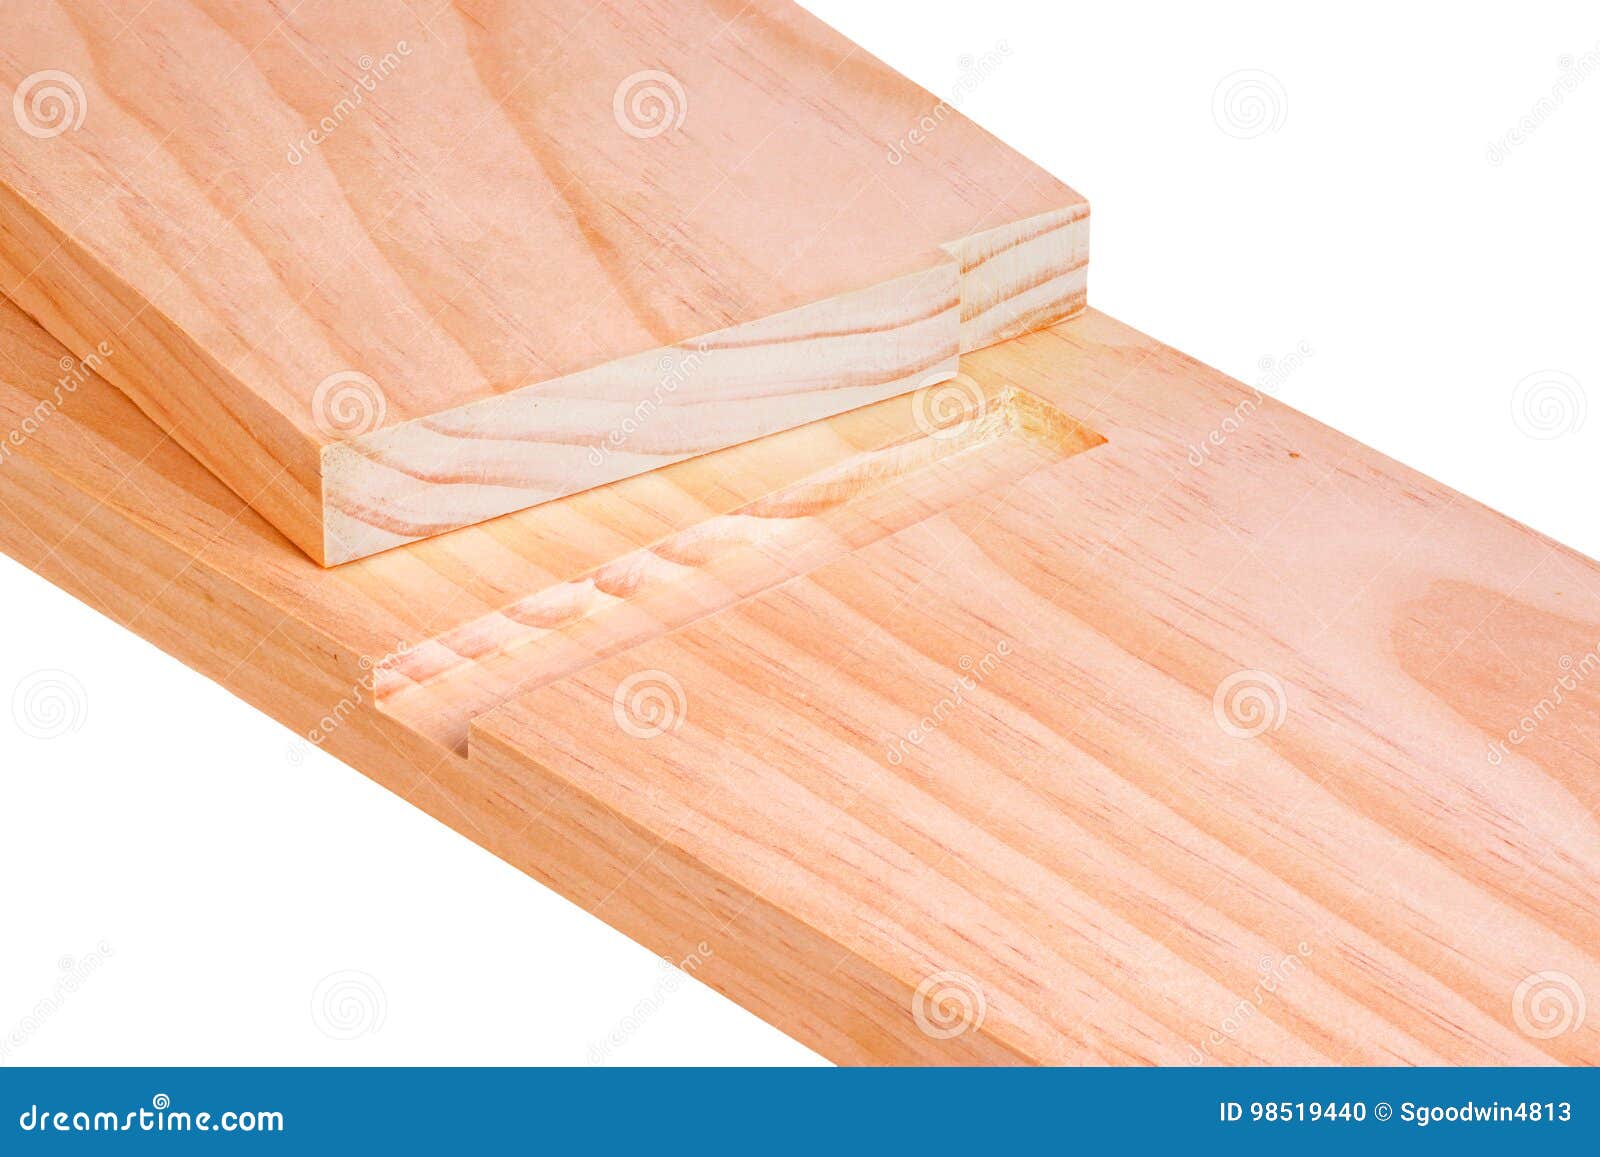 close-up of boards for a blind dado joint 